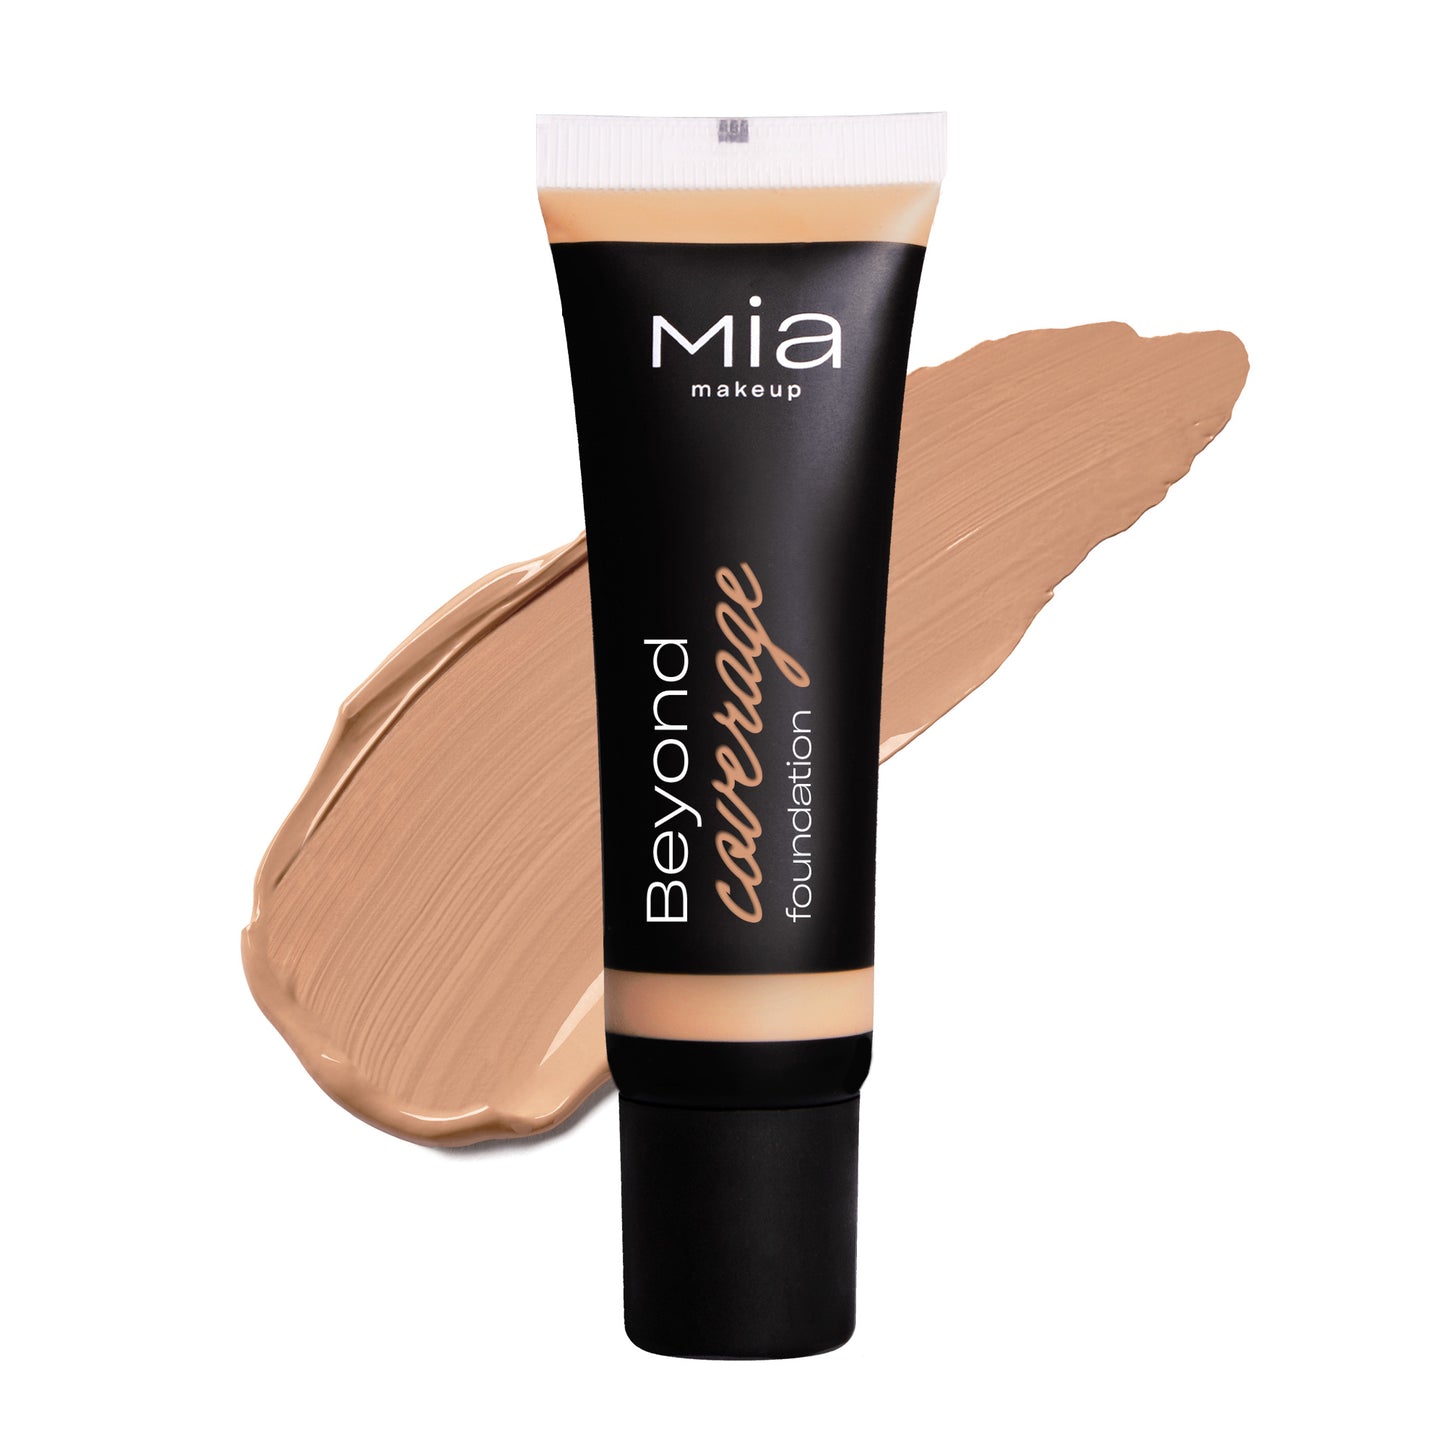 BEYOND COVERAGE FOUNDATION